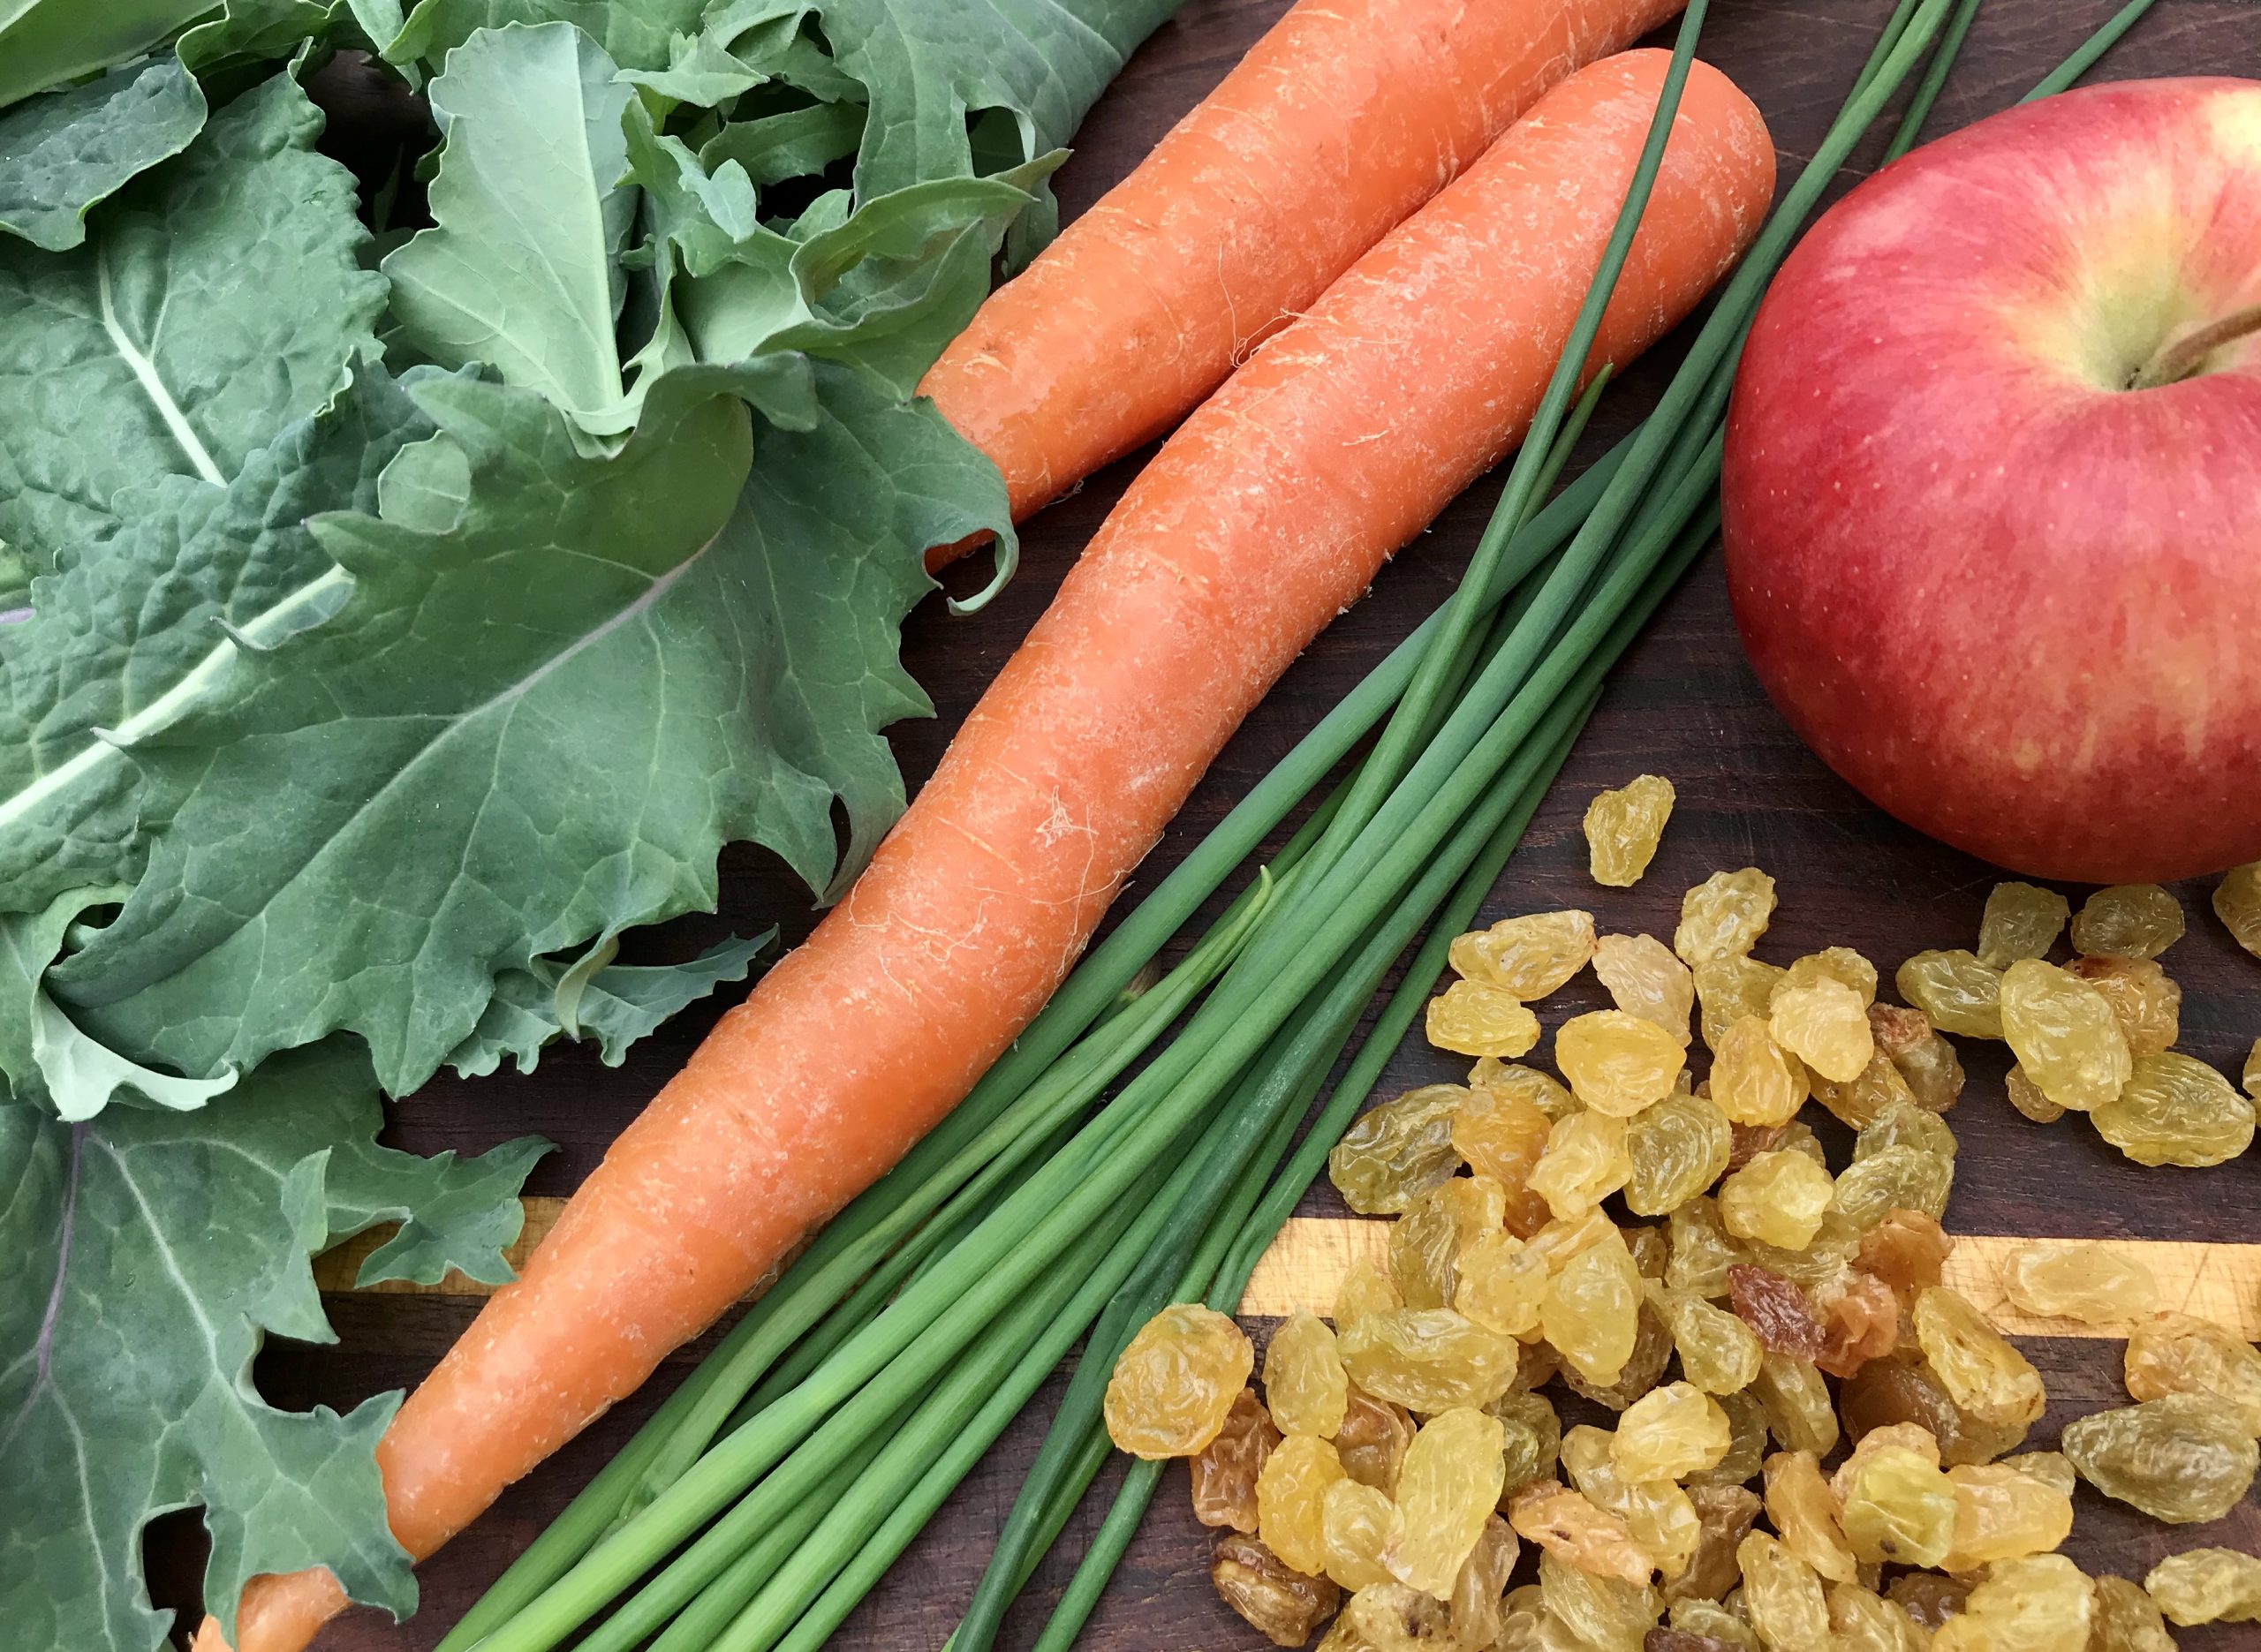 Kale, apple, carrots, raisins and chives on a cutting board